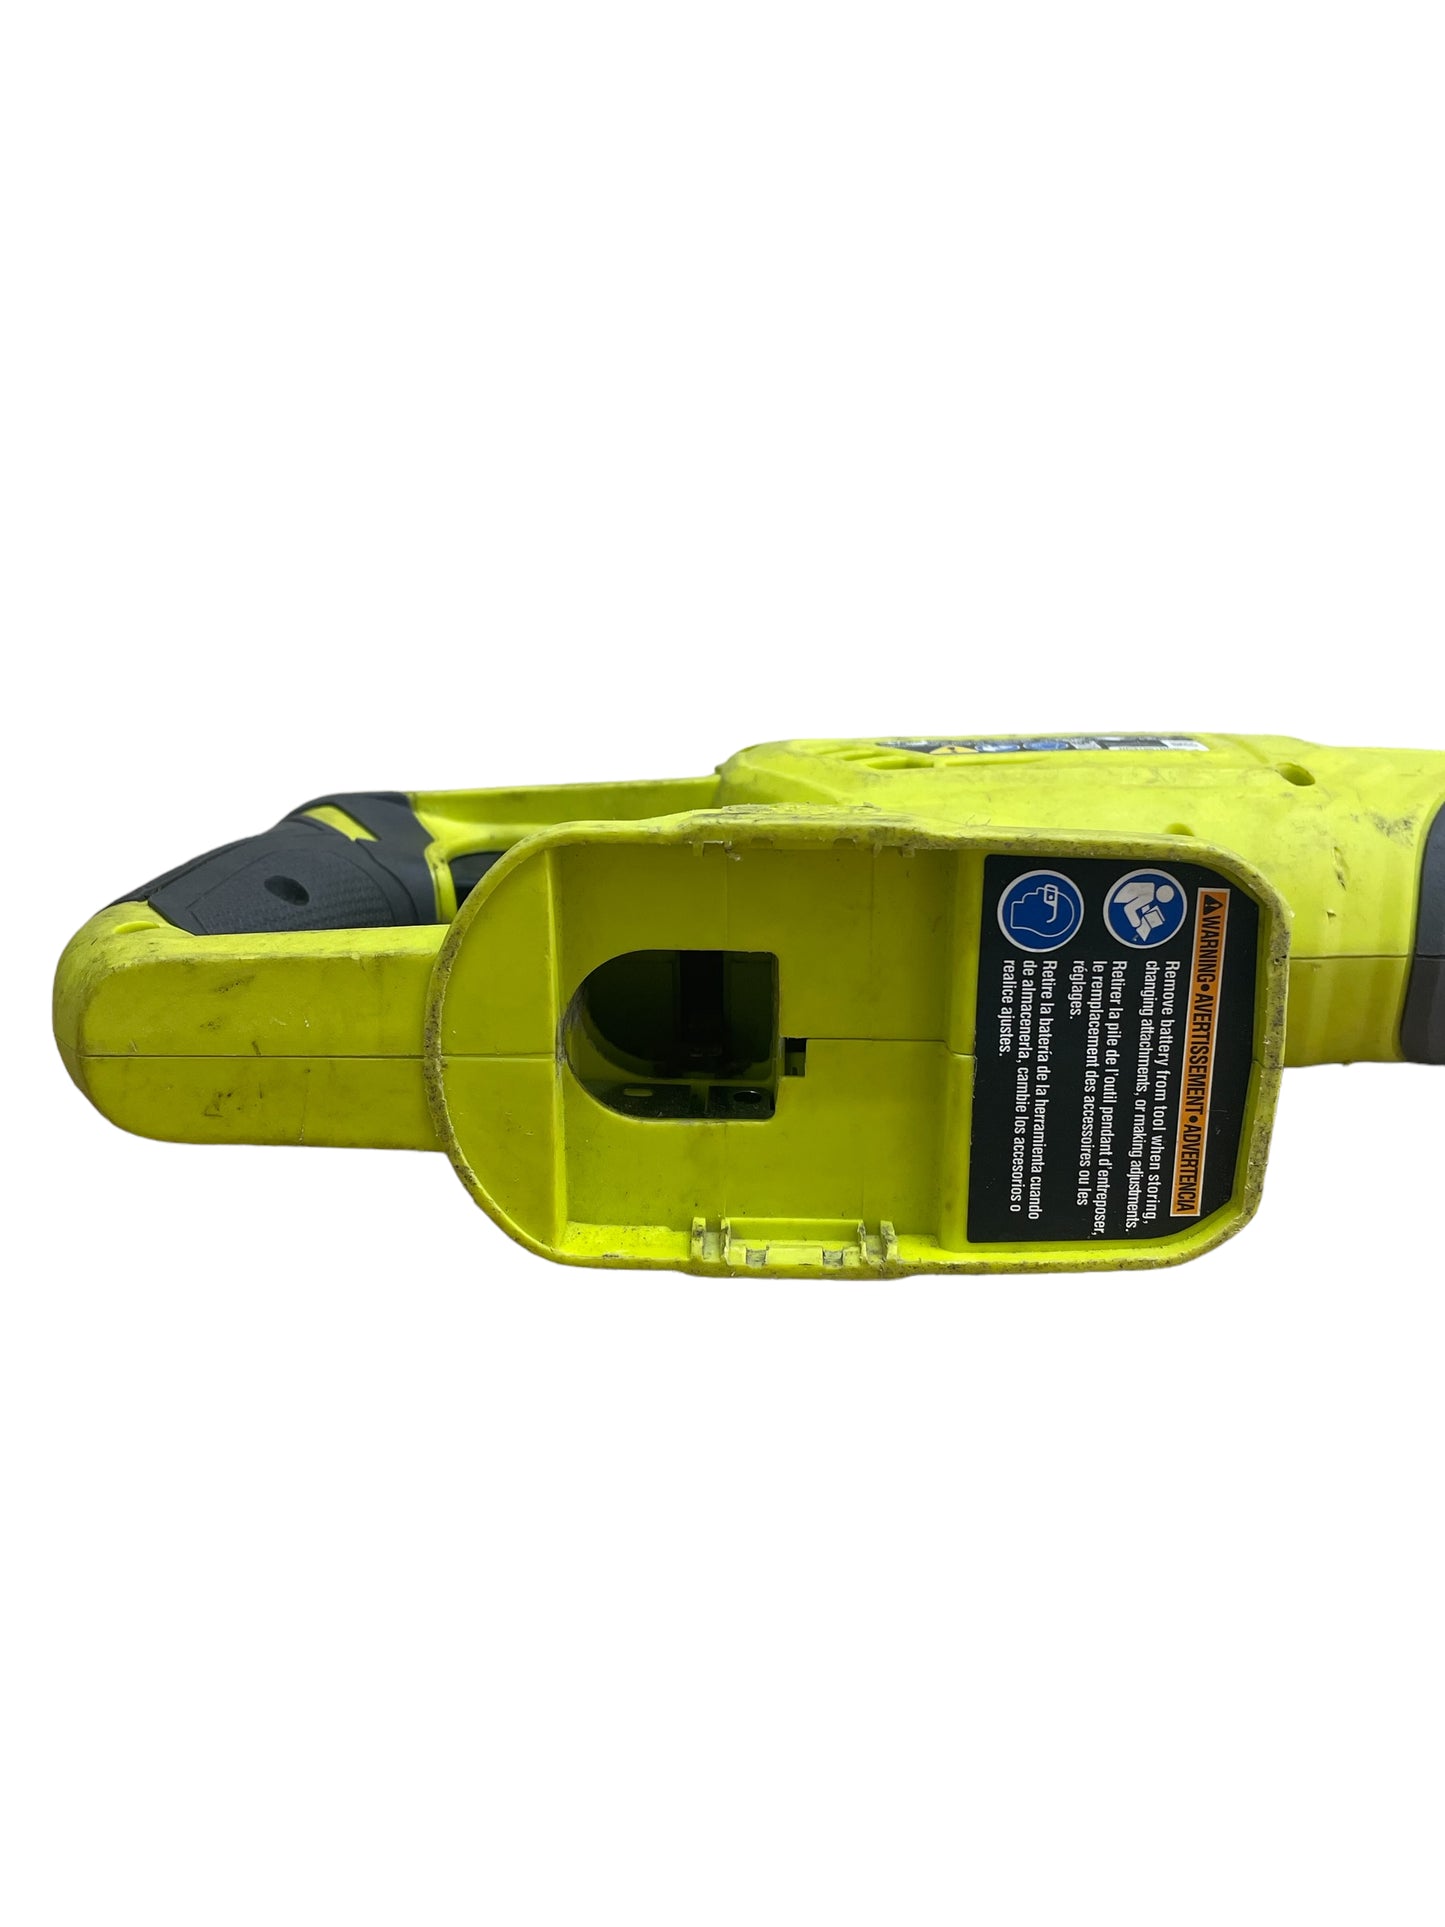 Secondhand Ryobi P519VN Saw (Local pick-up only)